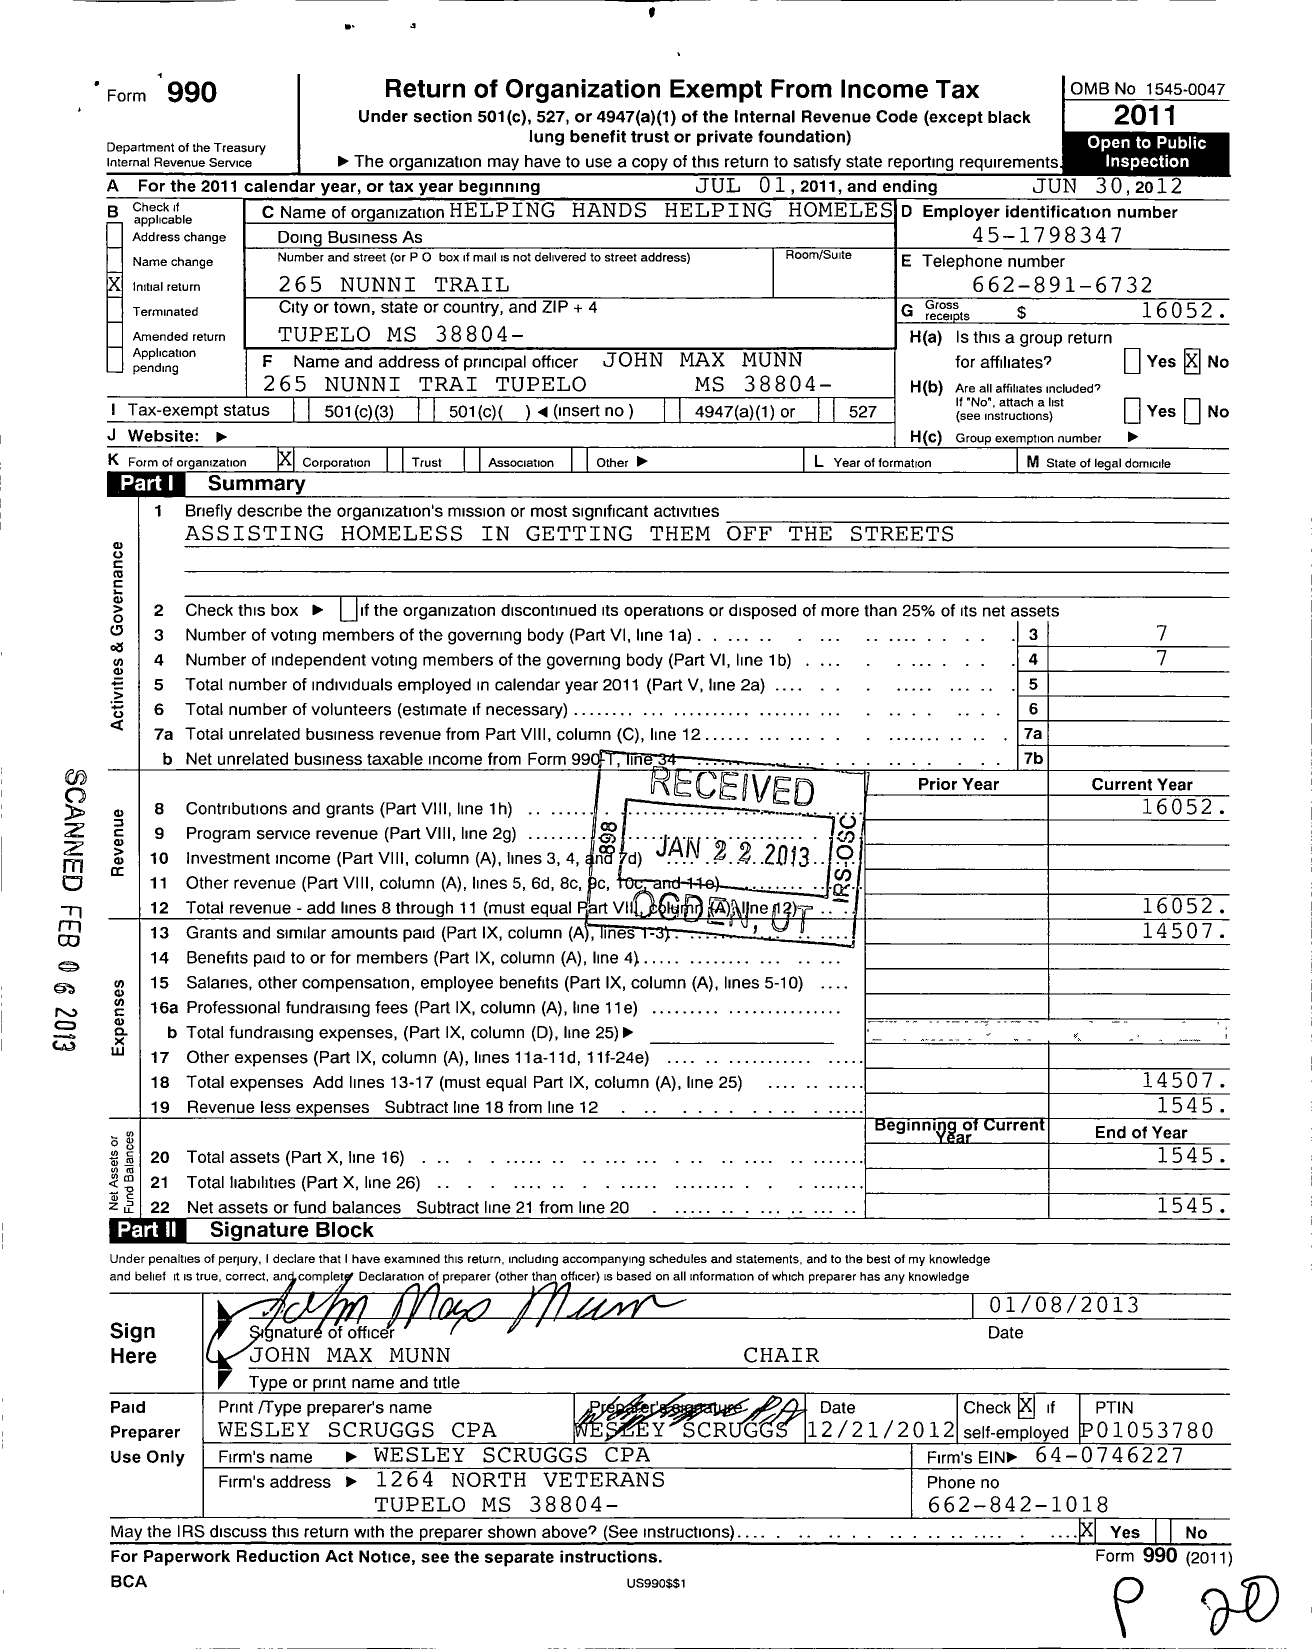 Image of first page of 2011 Form 990O for Helping Hands Helping Homeless